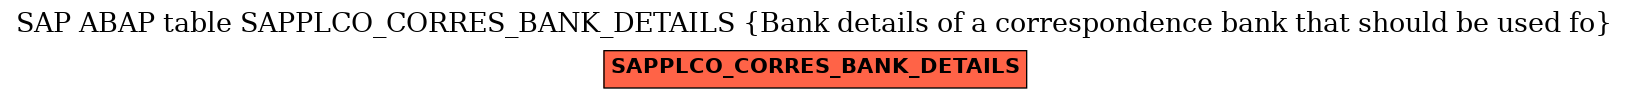 E-R Diagram for table SAPPLCO_CORRES_BANK_DETAILS (Bank details of a correspondence bank that should be used fo)